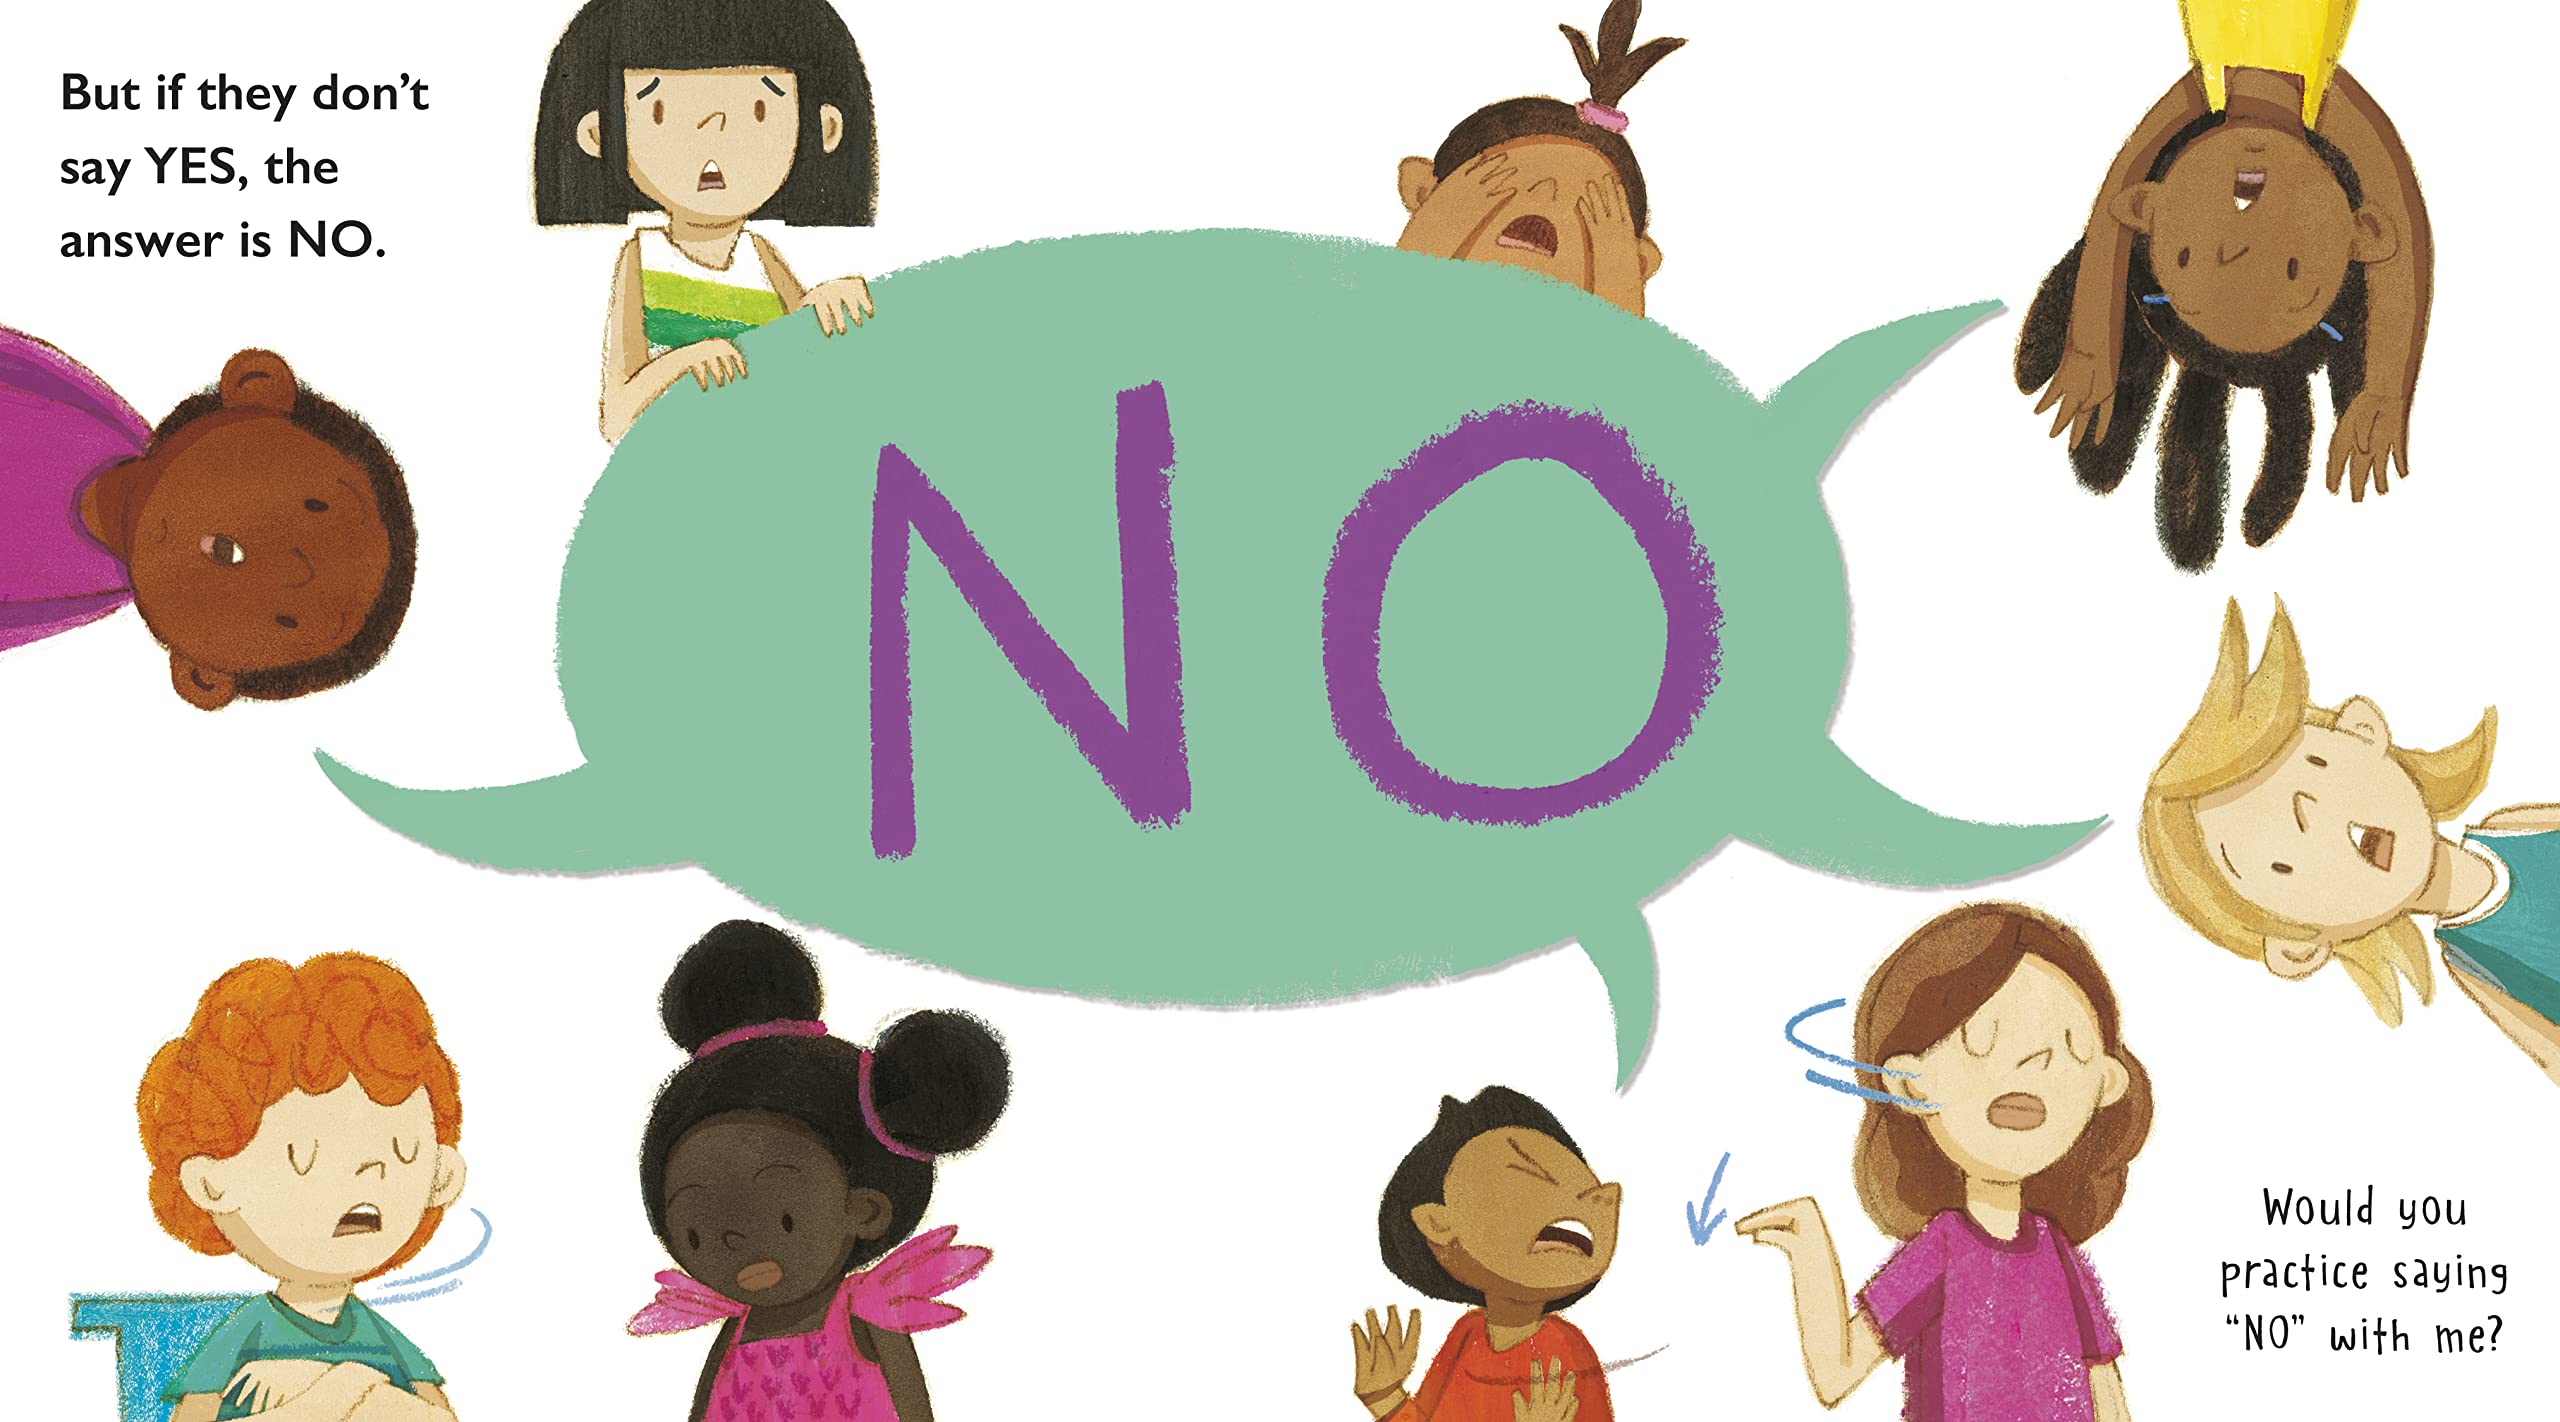 Yes! No! A First Conversation About Consent